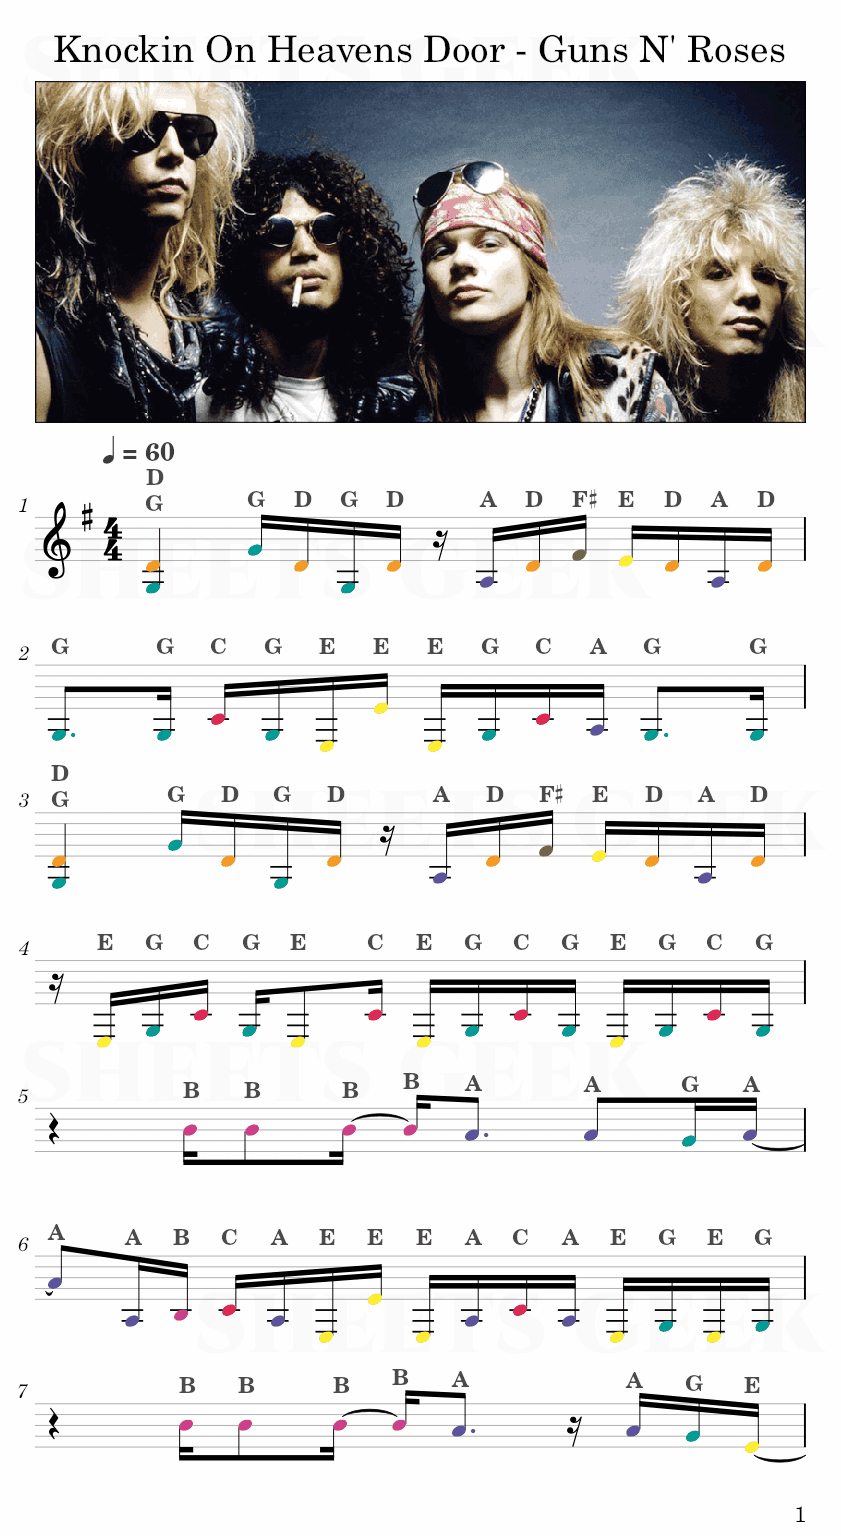 Knockin On Heavens Door - Guns N' Roses Easy Sheet Music Free for piano, keyboard, flute, violin, sax, cello page 1